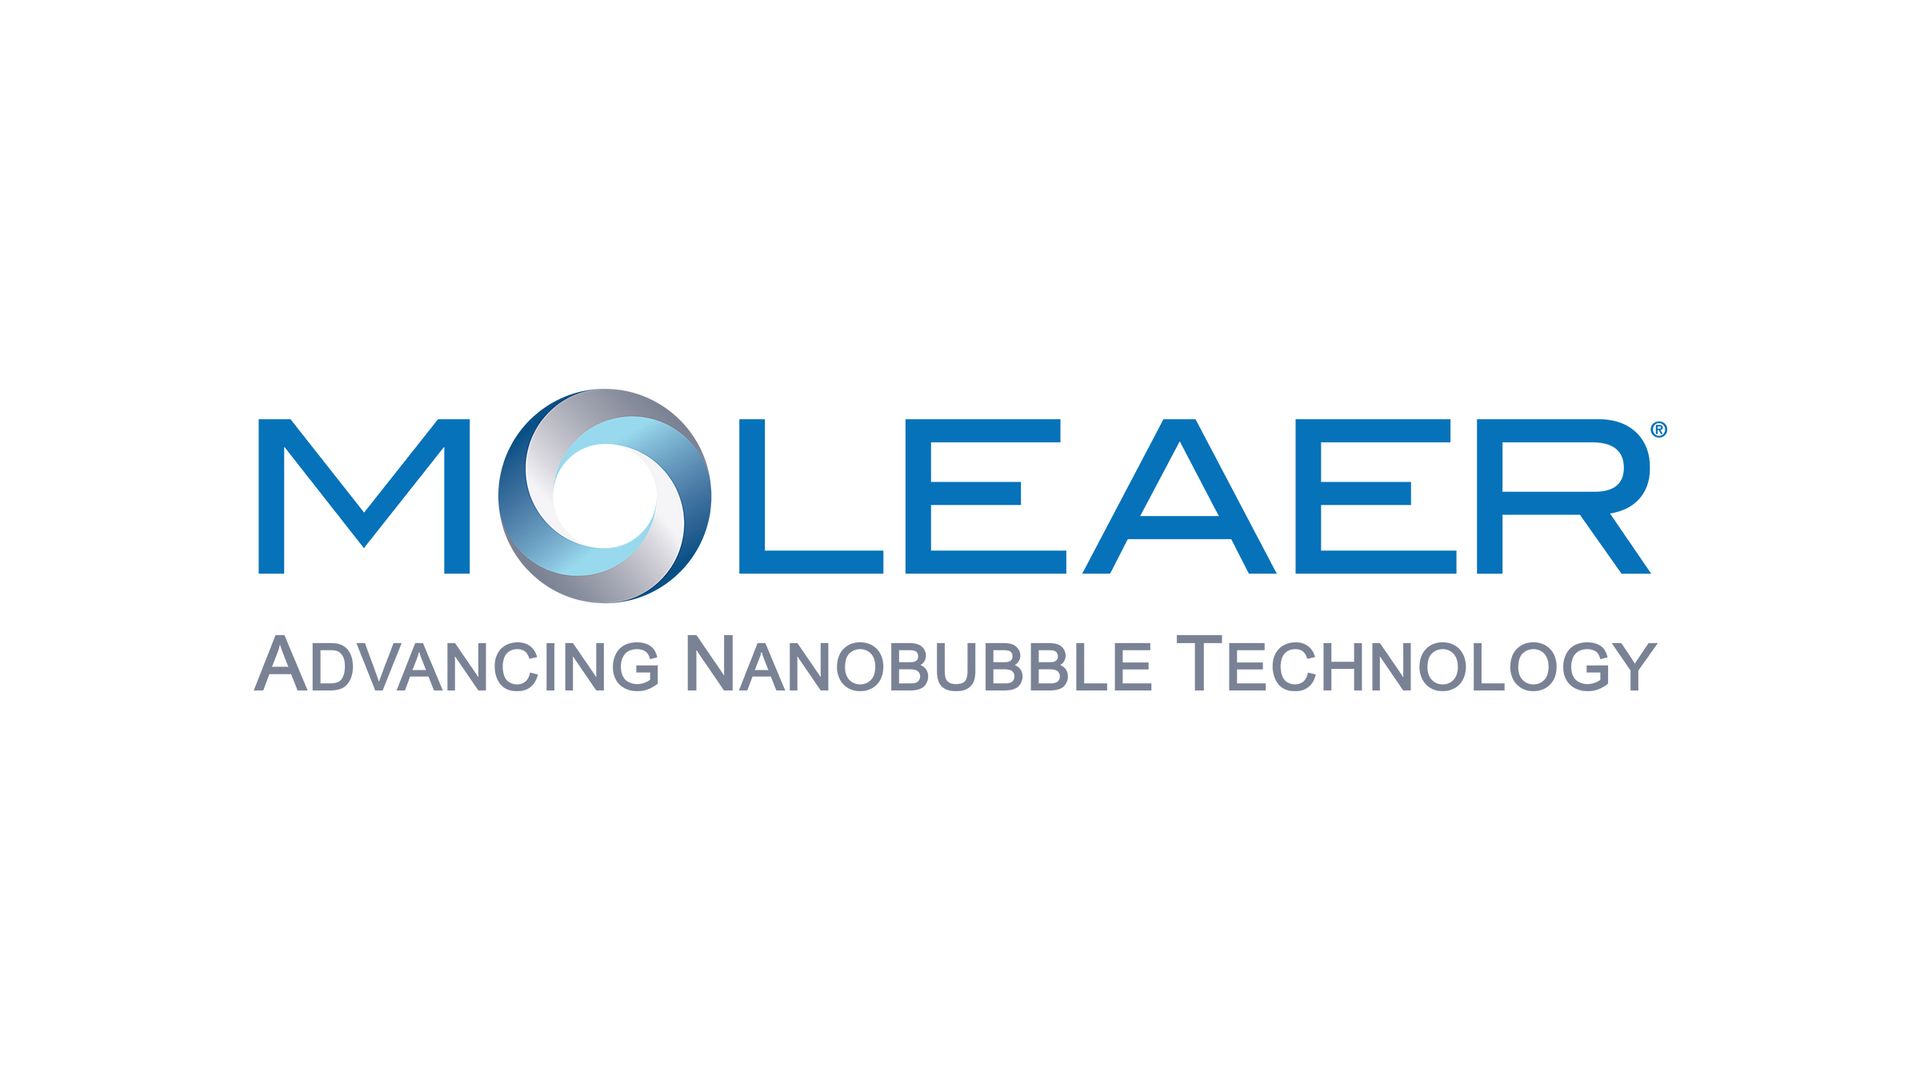 New GLOBAL G.A.P. Community Member supports more sustainable farming through leading nanobubble technology.  